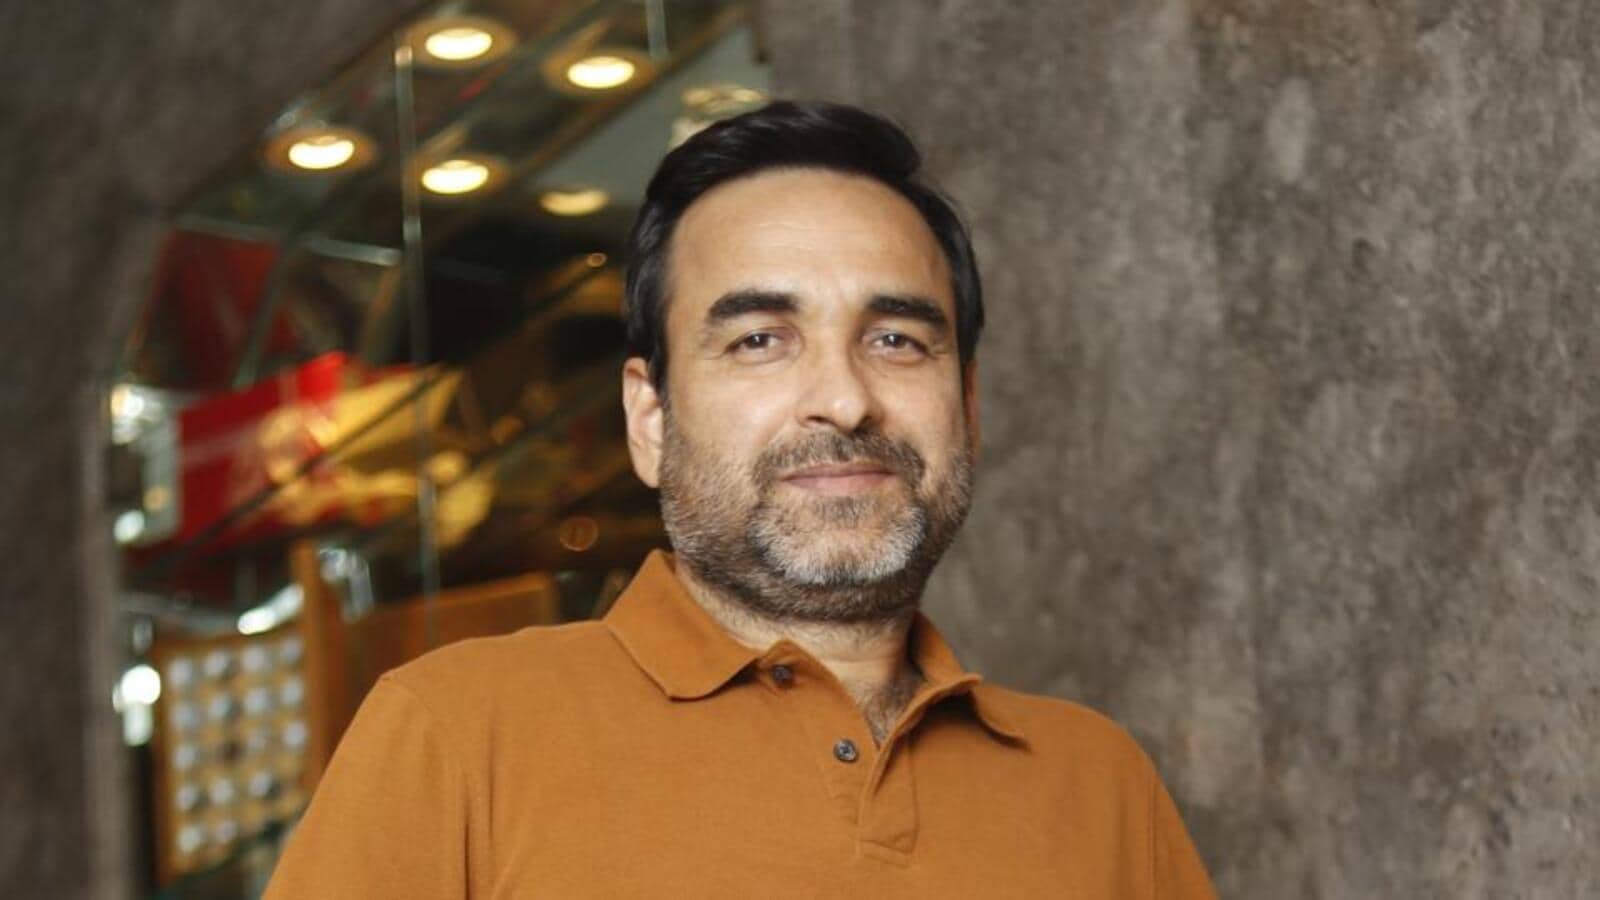 Pankaj Tripathi: Earlier I would feel bad that people didn’t know my name, but only my characters